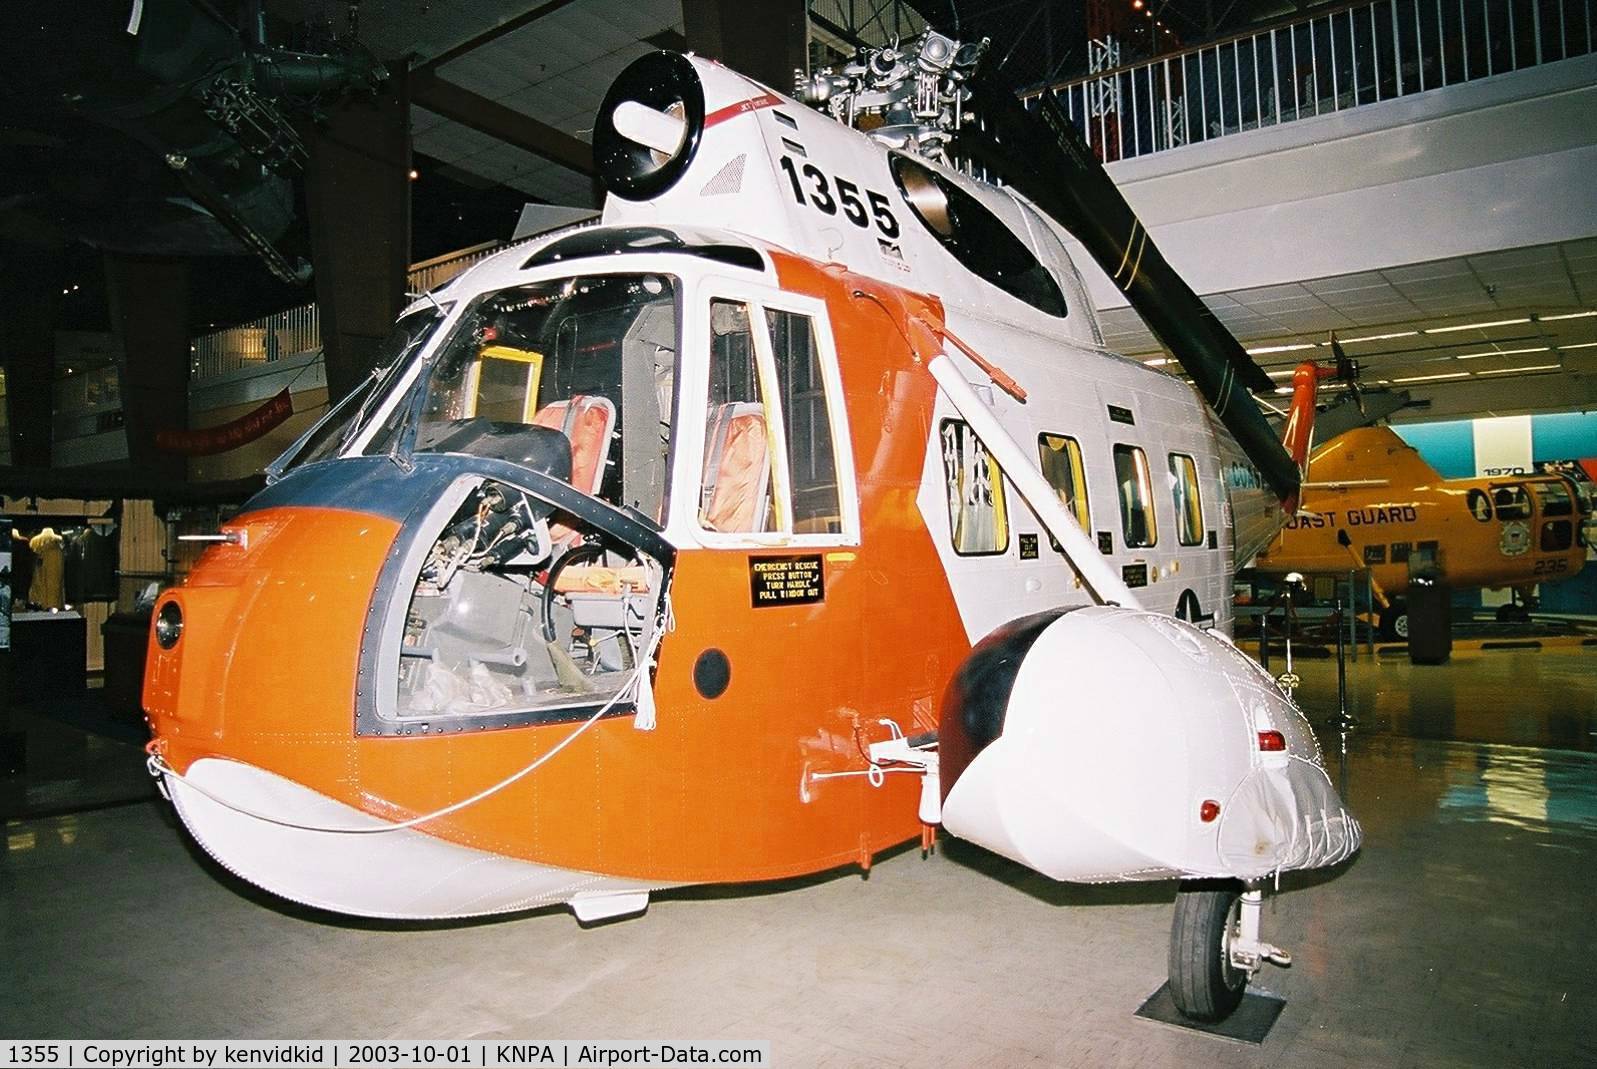 1355, Sikorsky HH-52A Sea Guard C/N 62.024, On display at the Museum of Naval Aviation, Pensacola.